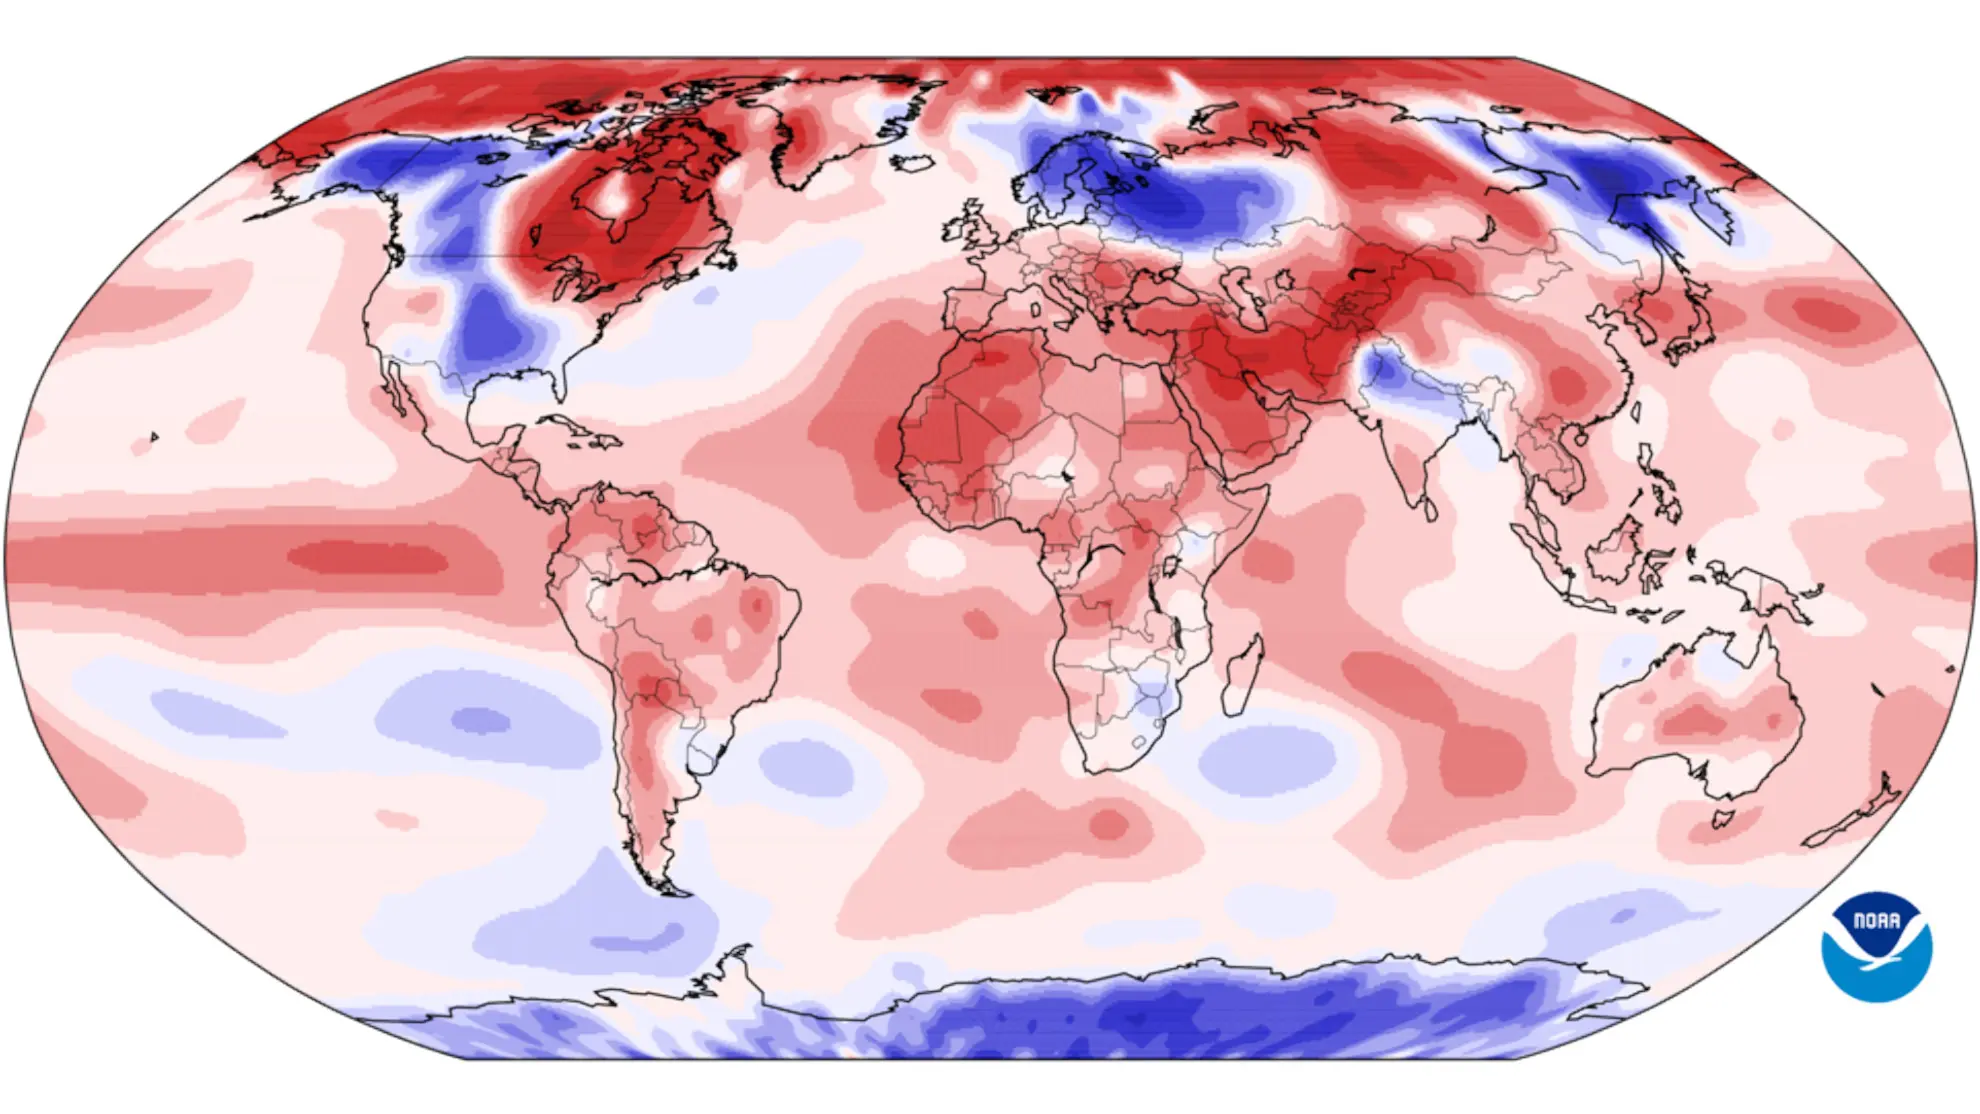 Earth just experienced its hottest 12 months in recorded history